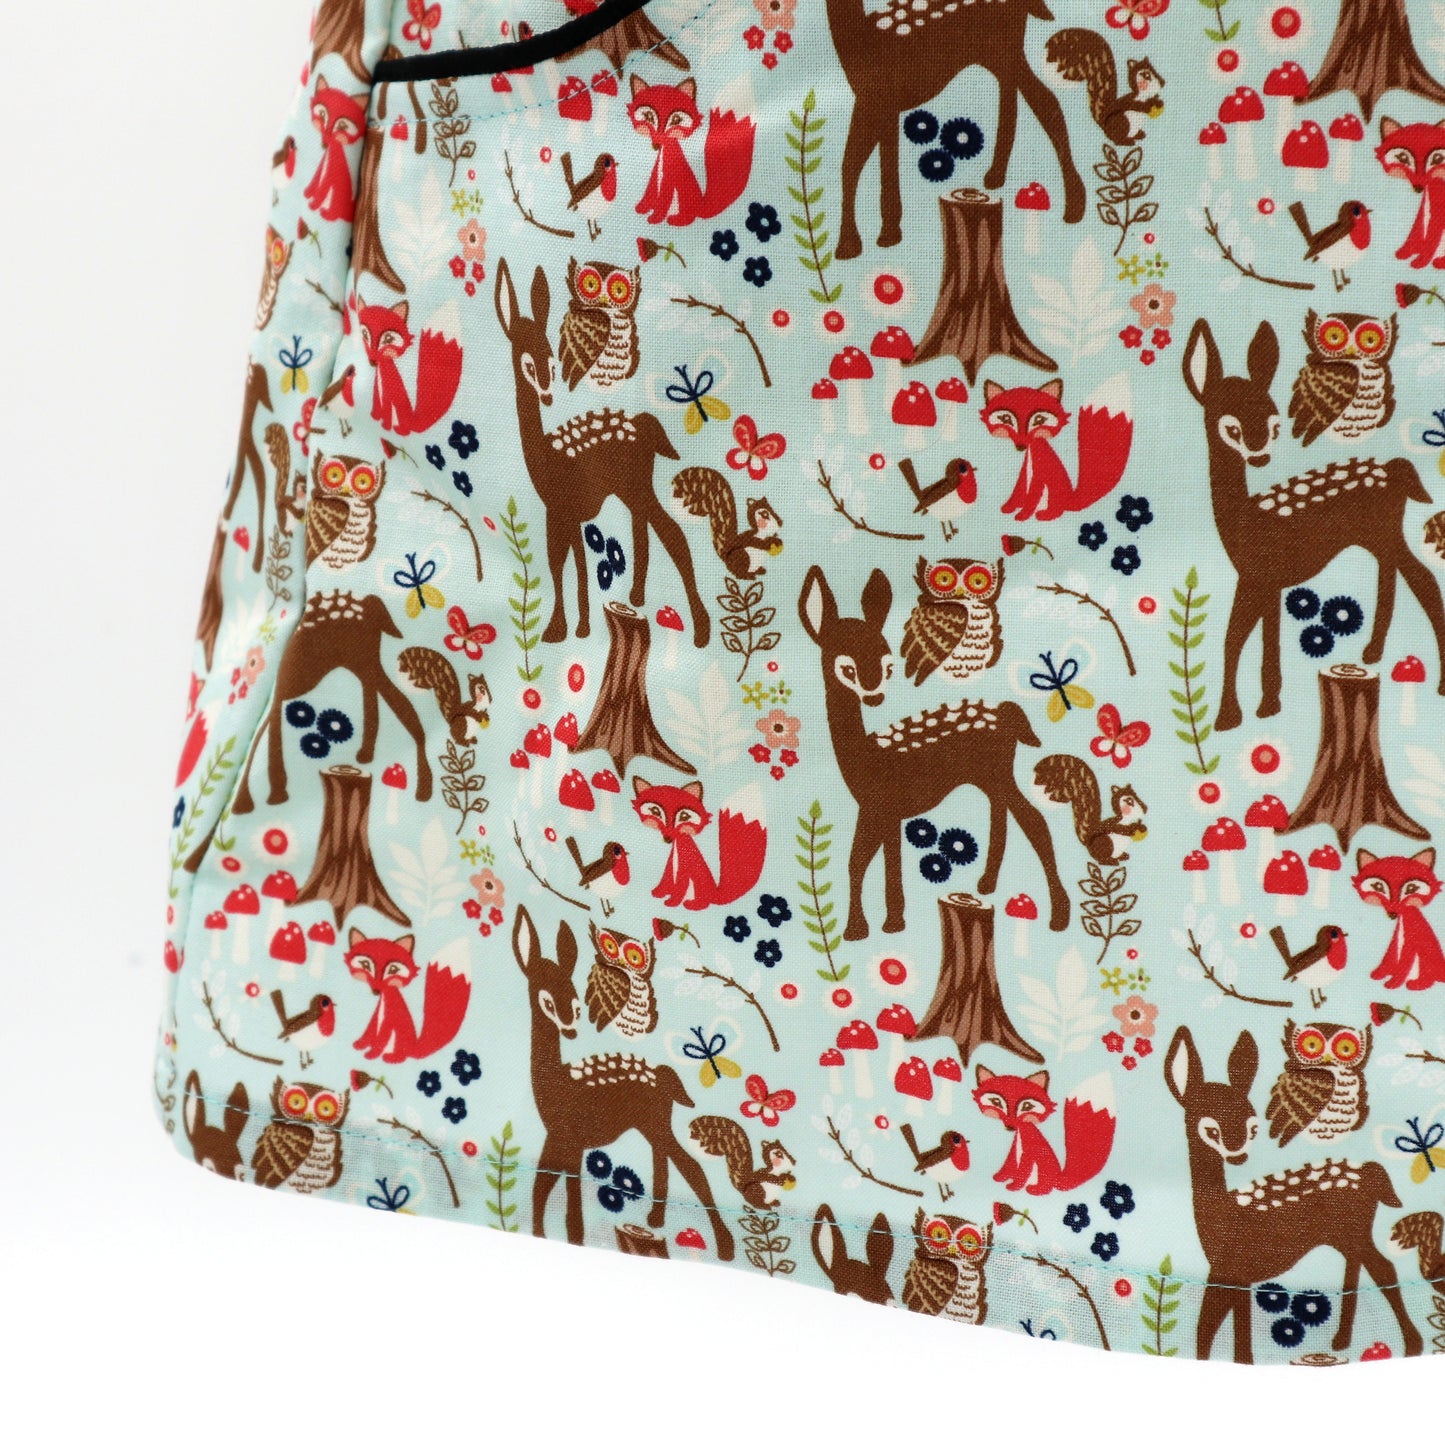 Girls aline skirt with pockets - sizes 1 to 8